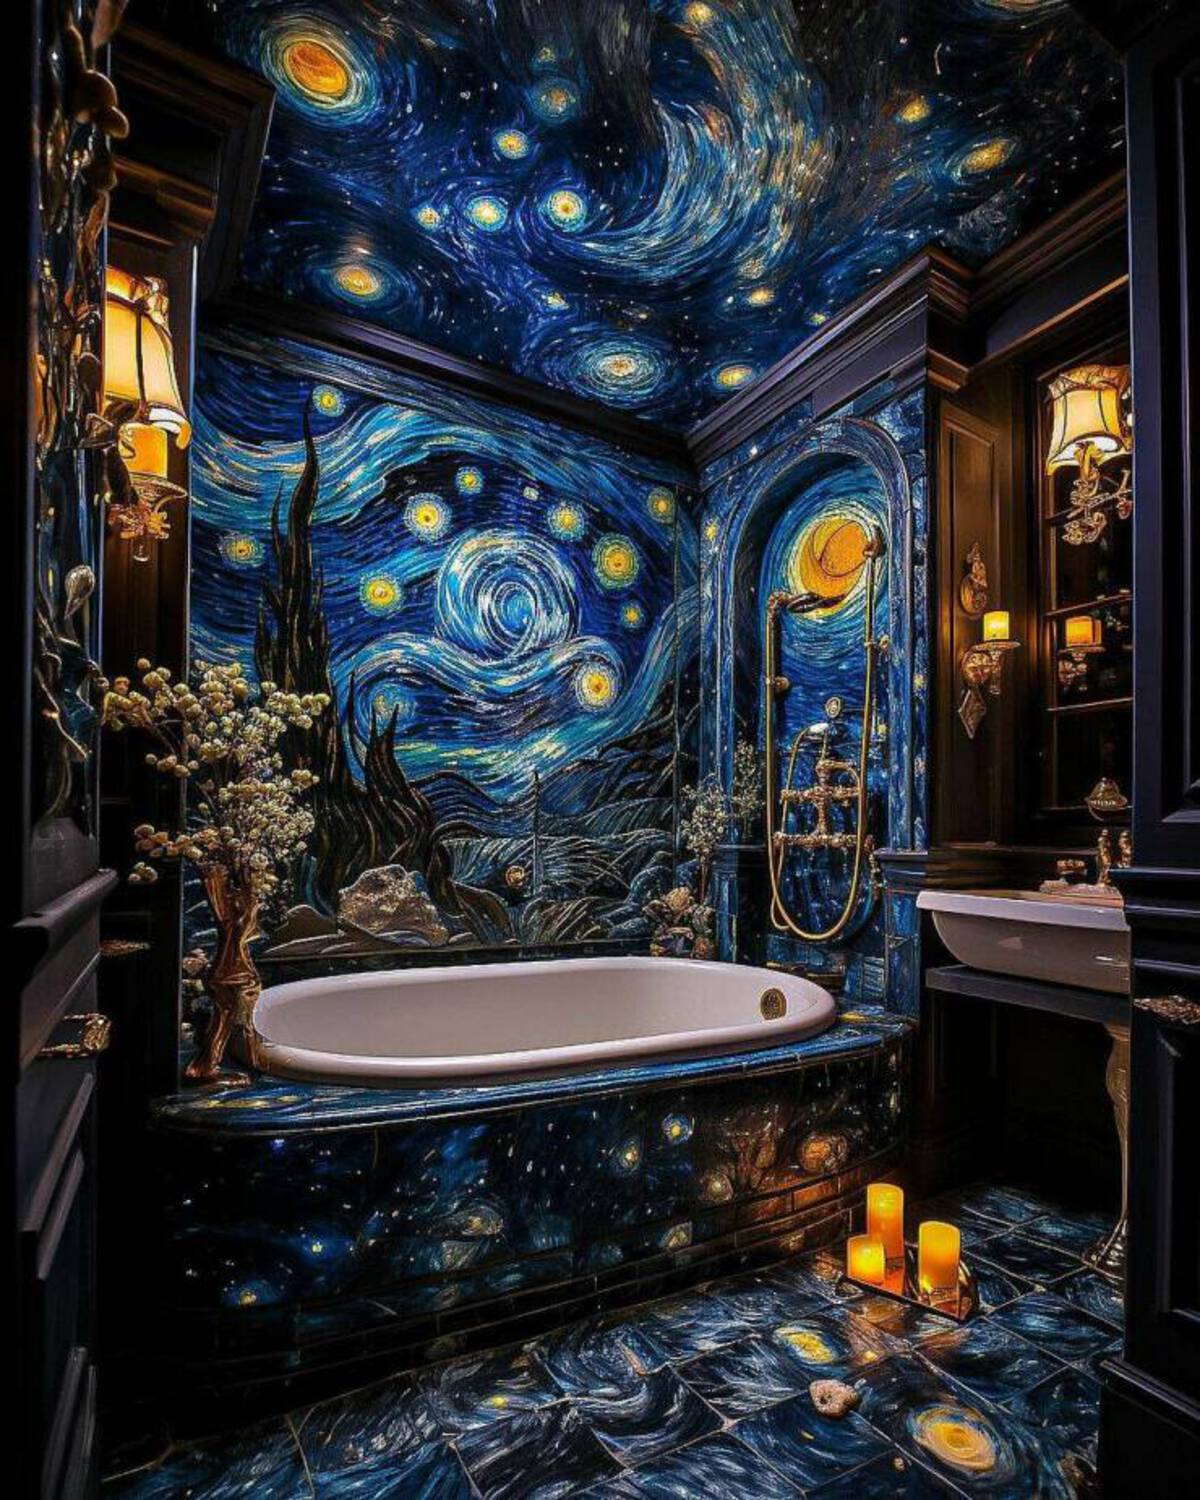 Someone had their bathroom done in the style of The  Starry Night by Van Gough.